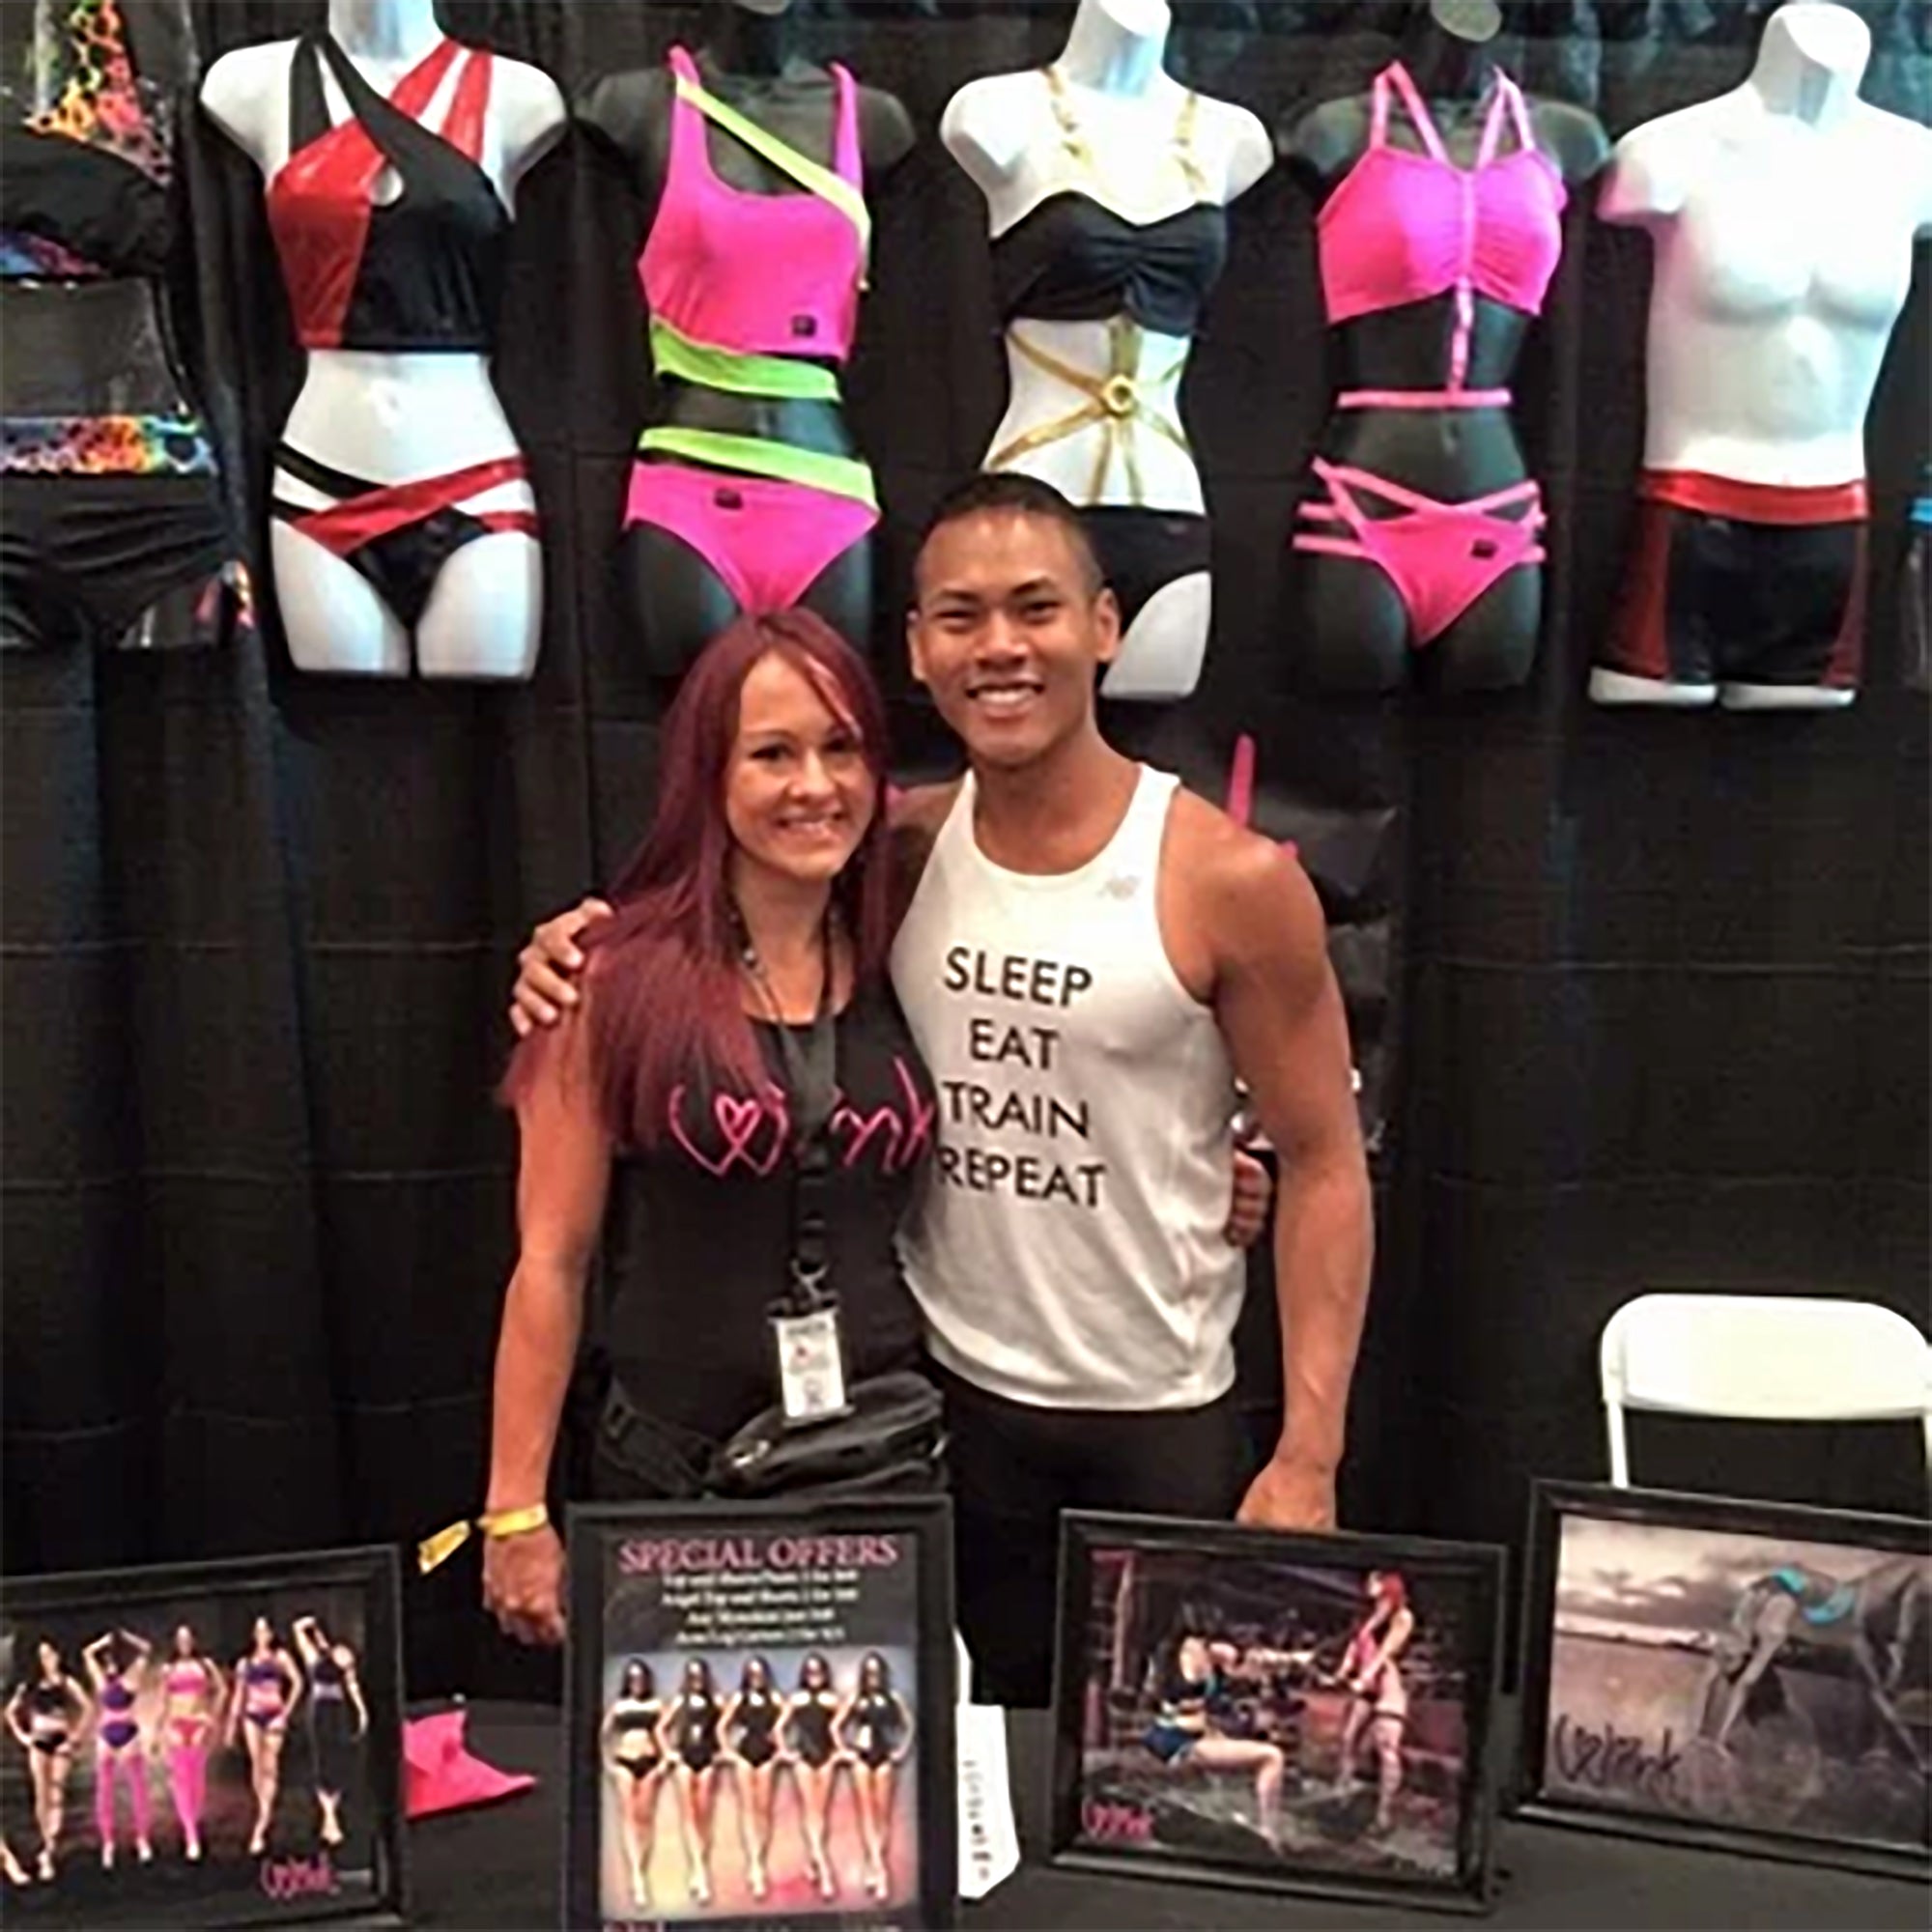 Wink Fitnesswear at Pole Expo 2015